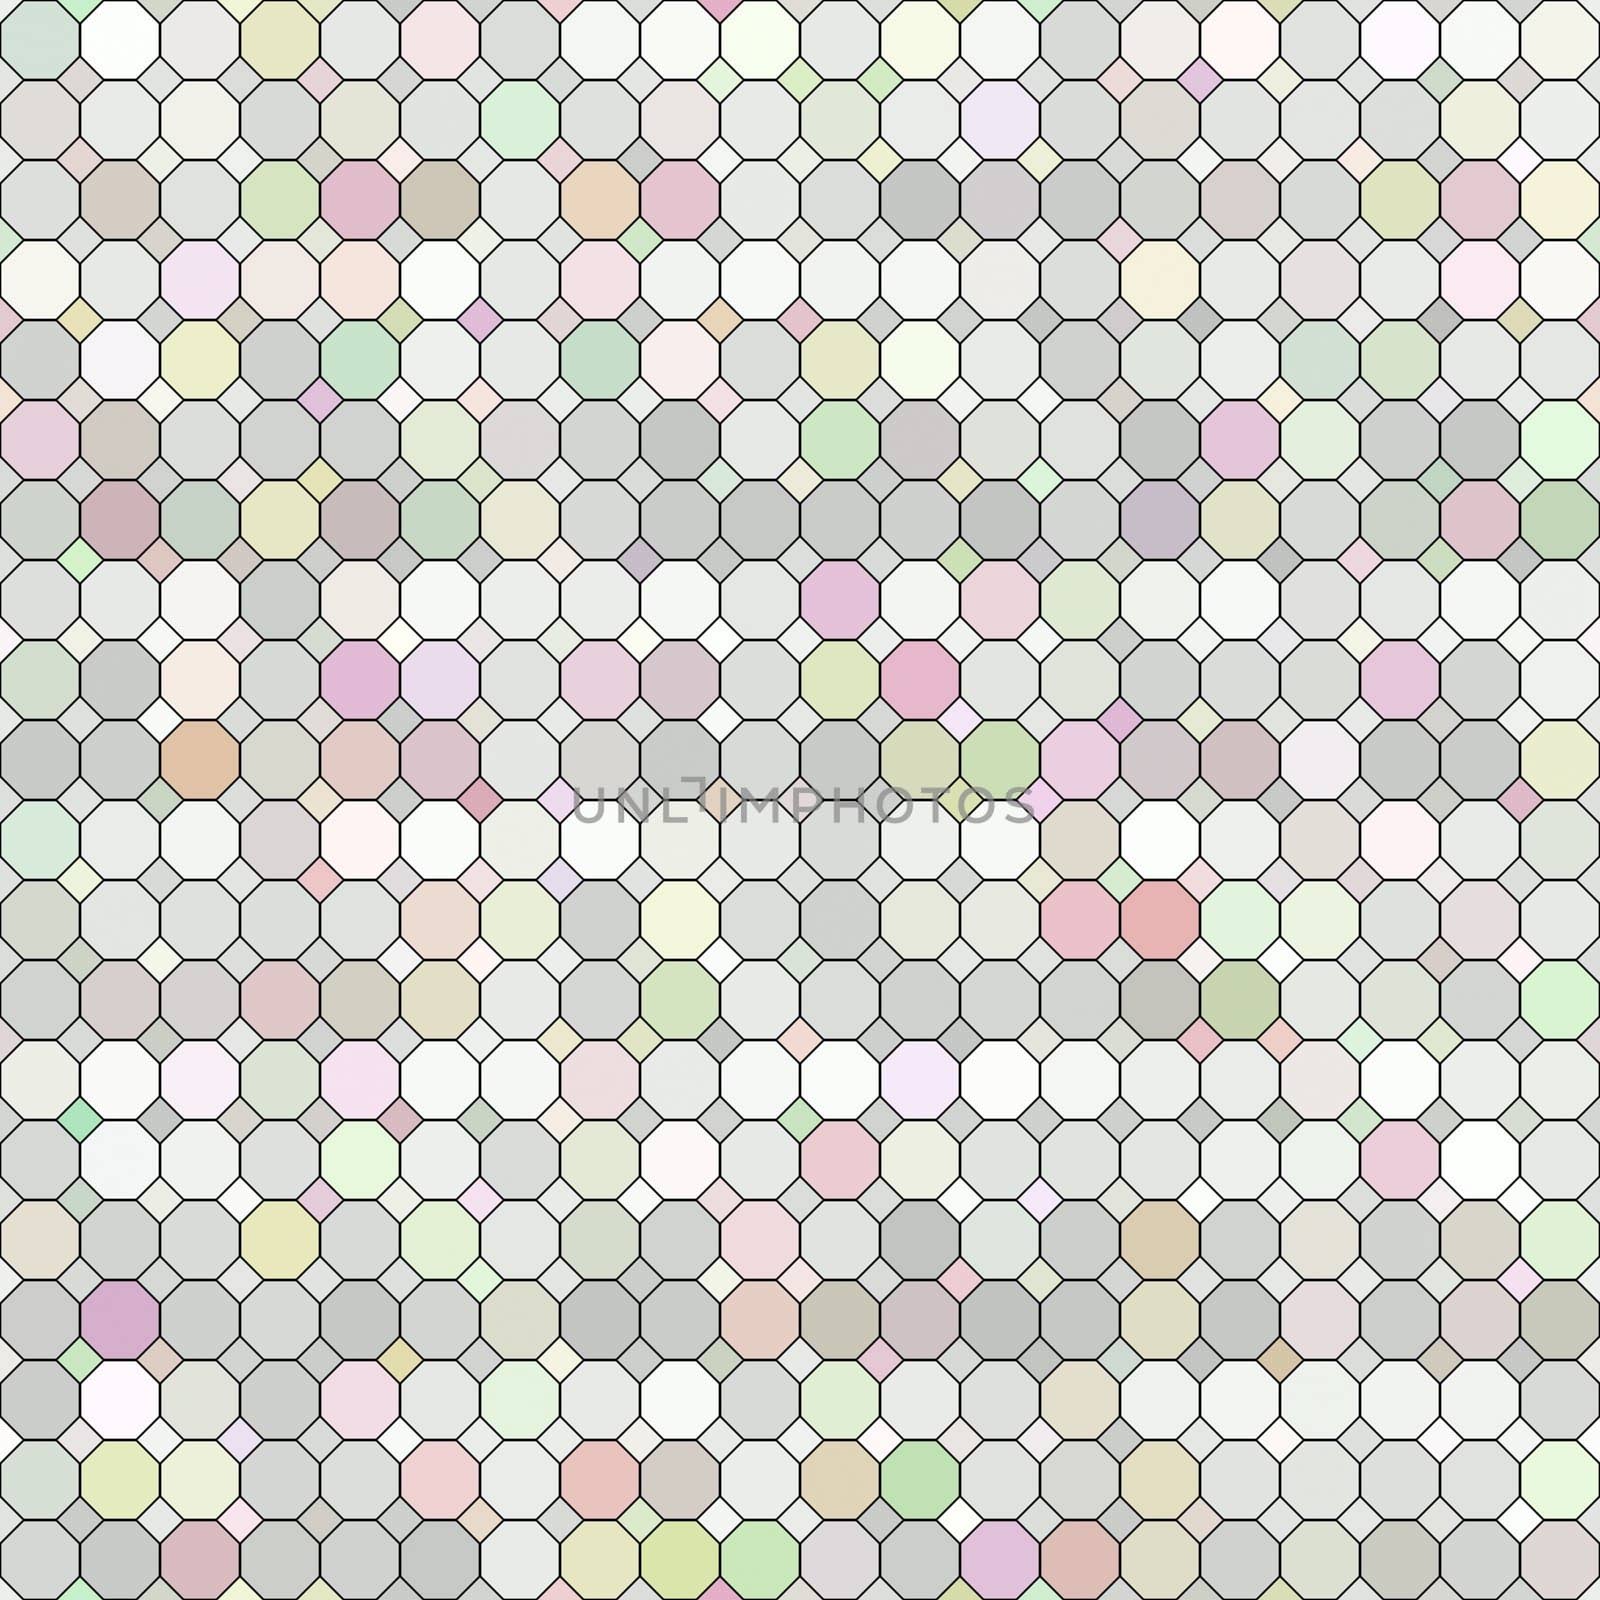 pastel colored grid by weknow